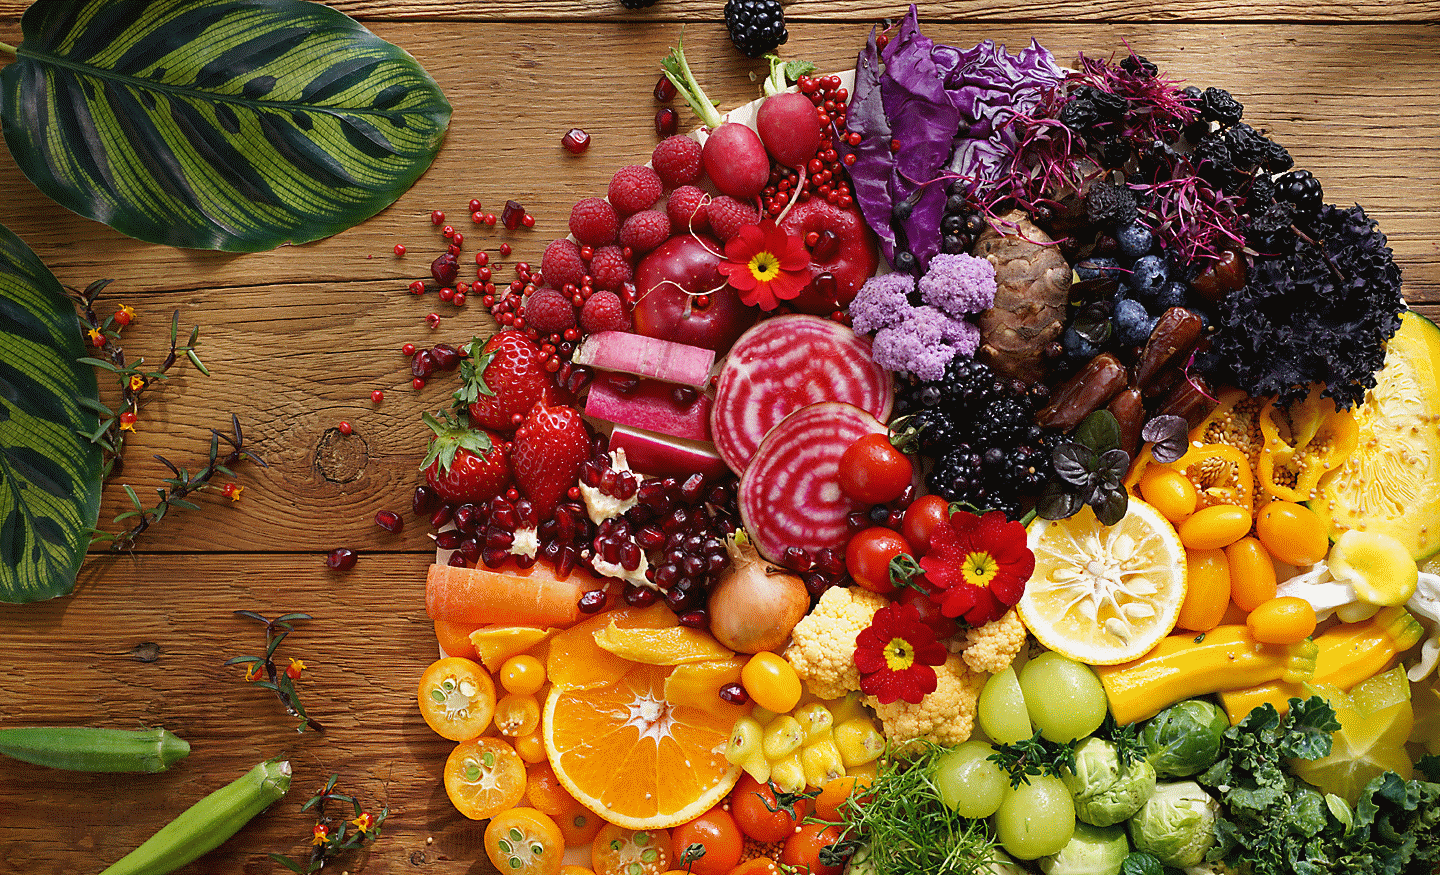 Image of colourful vegetables and fruits taken with this lens at high resolution in every corner